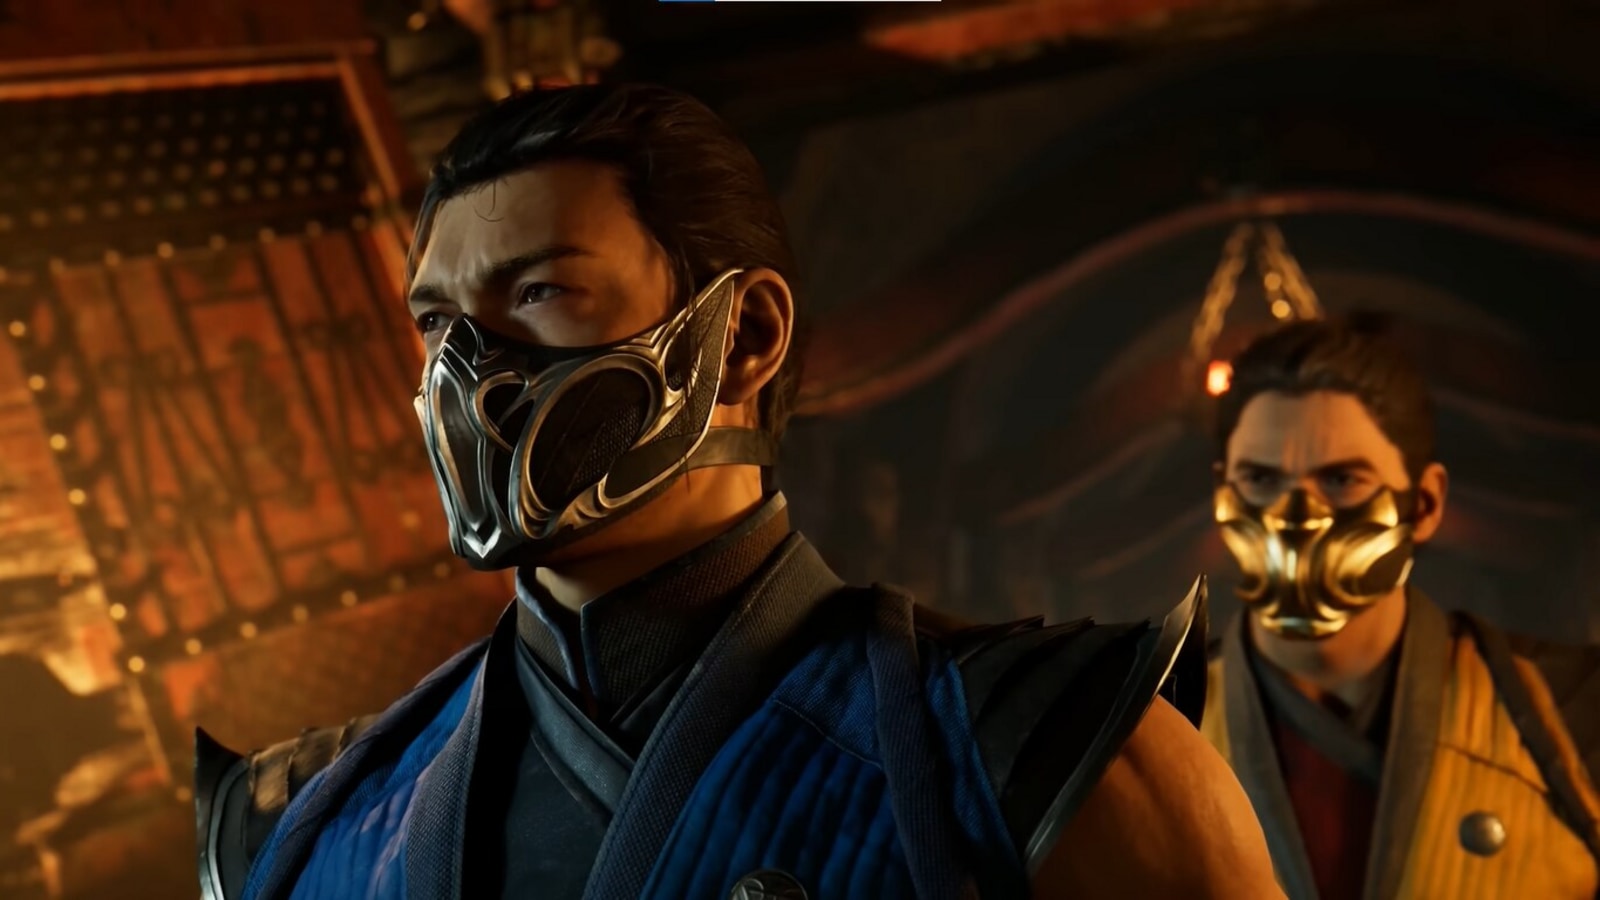 Mortal Kombat 1: Know all the Fatalities and the buttons to